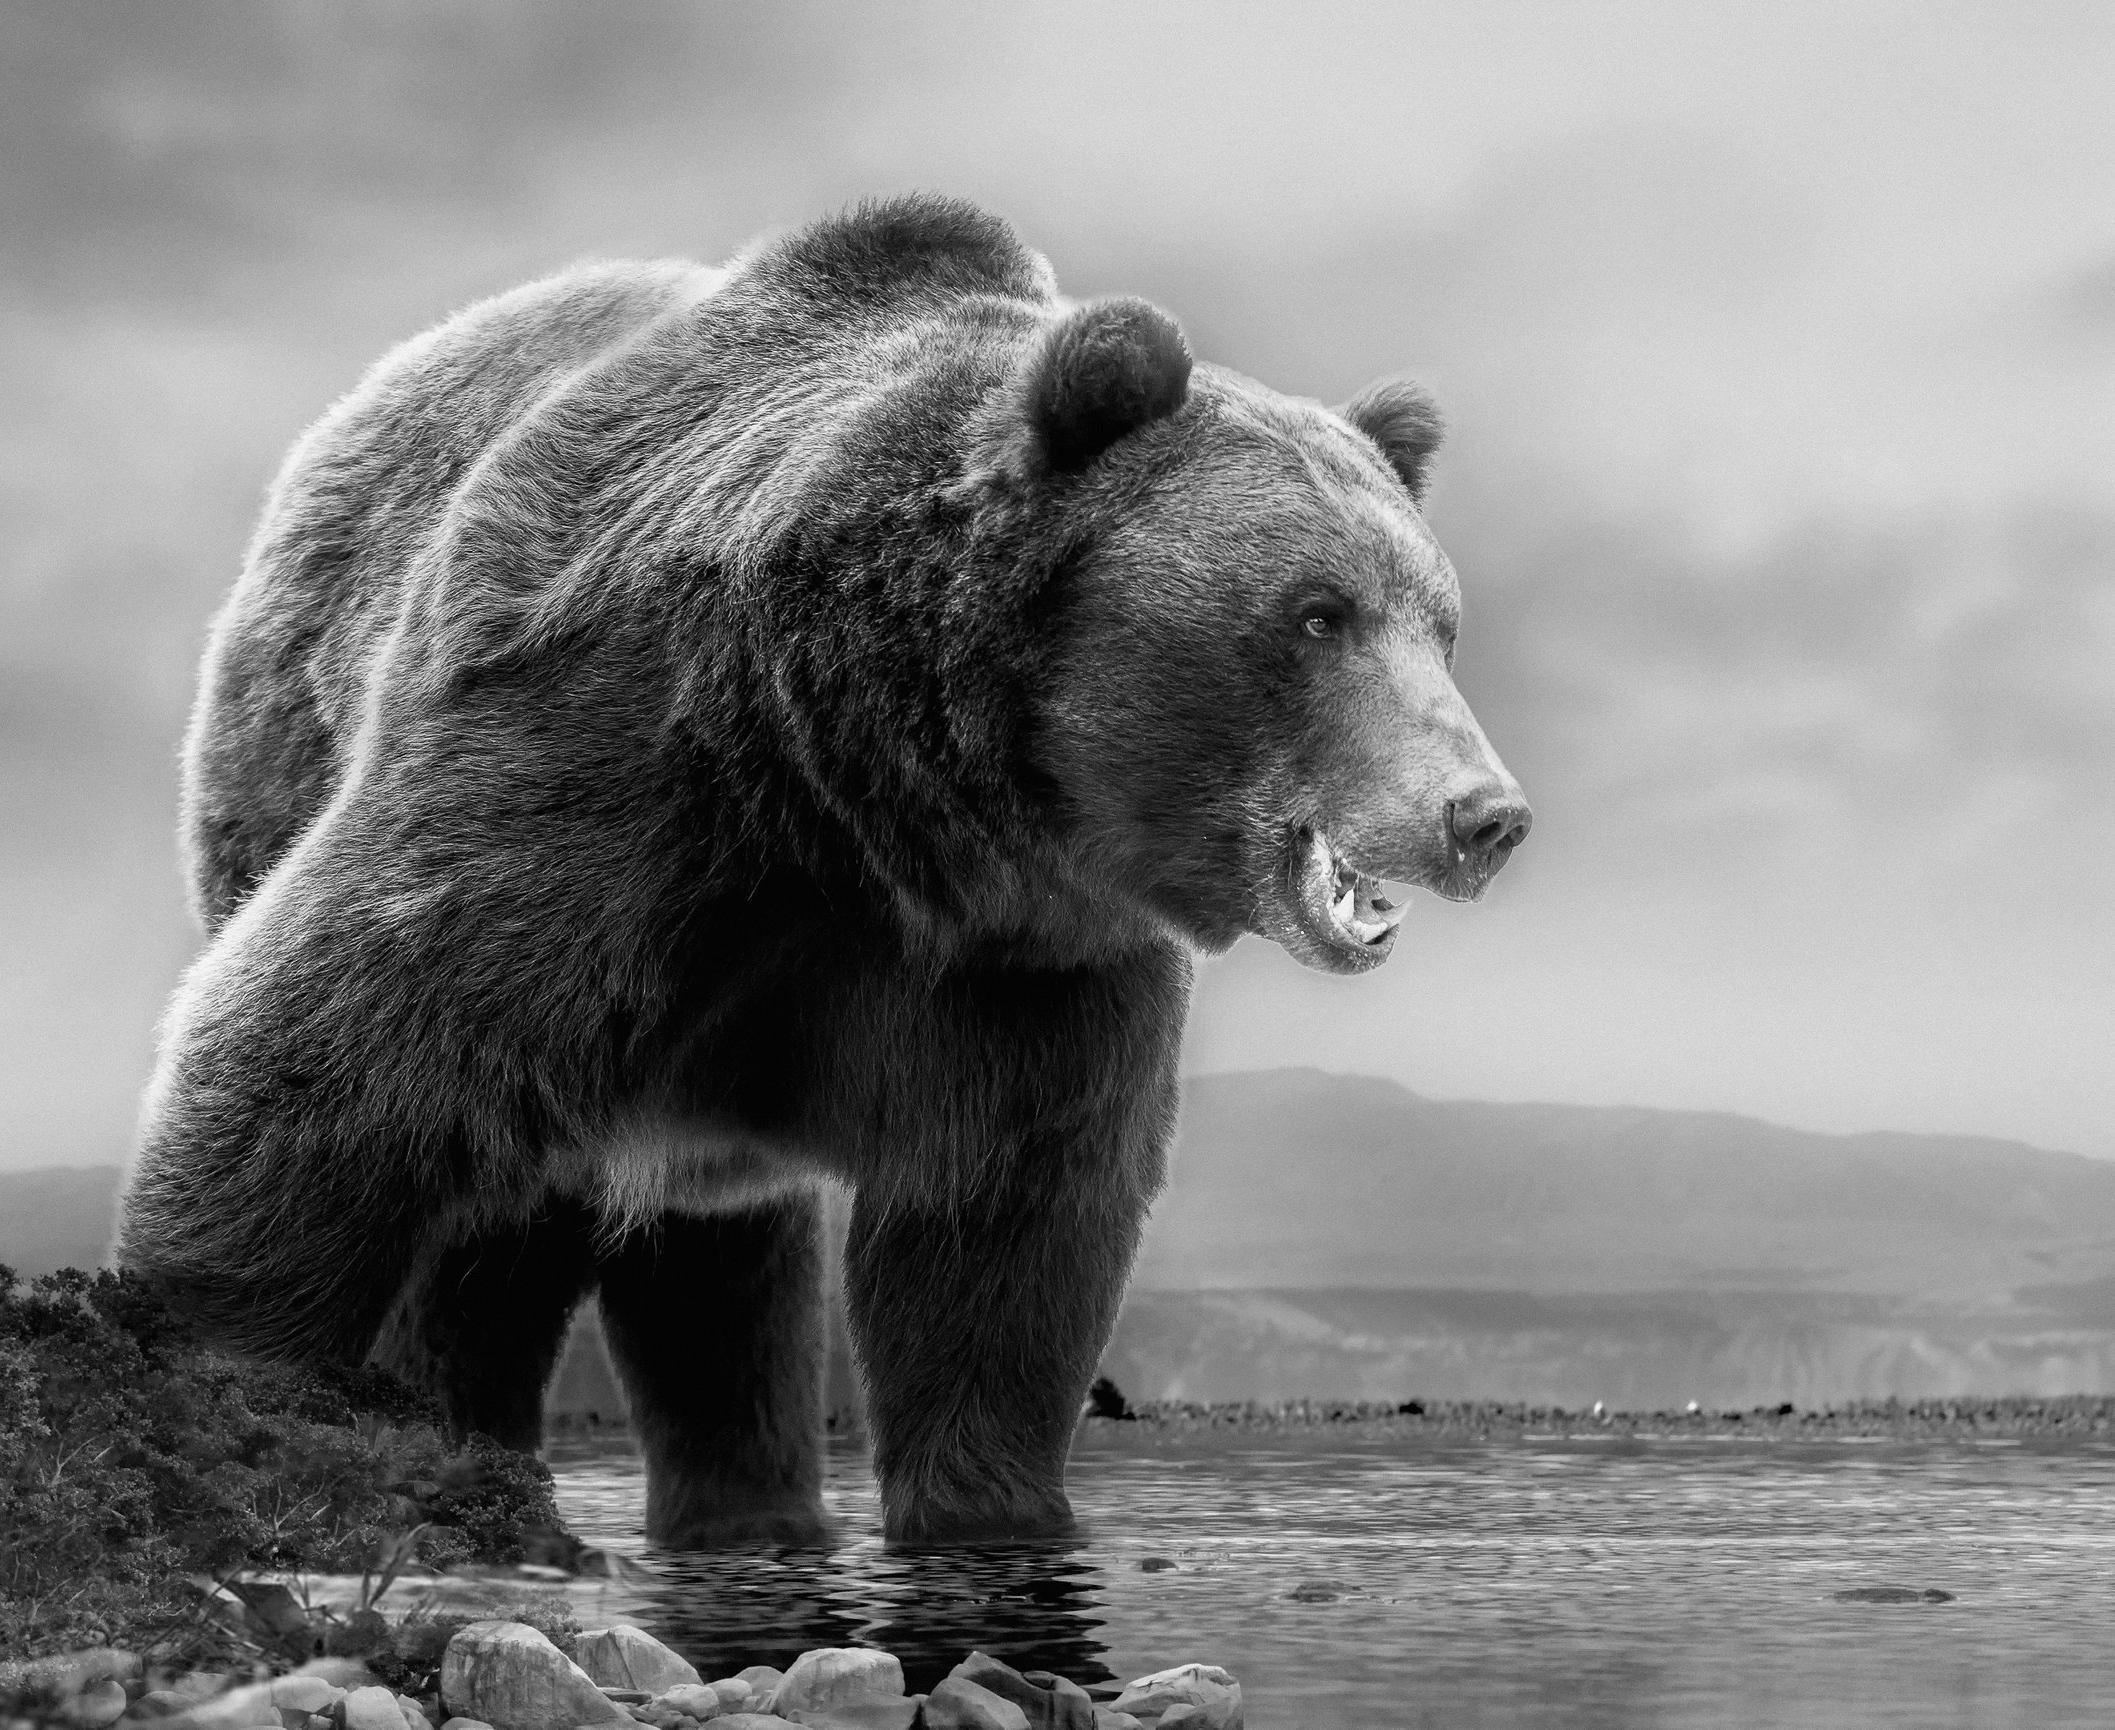 Shane Russeck Black and White Photograph - On The Waterfront - 20x30 Black & White Photography, Kodiak Bear Unsigned Print